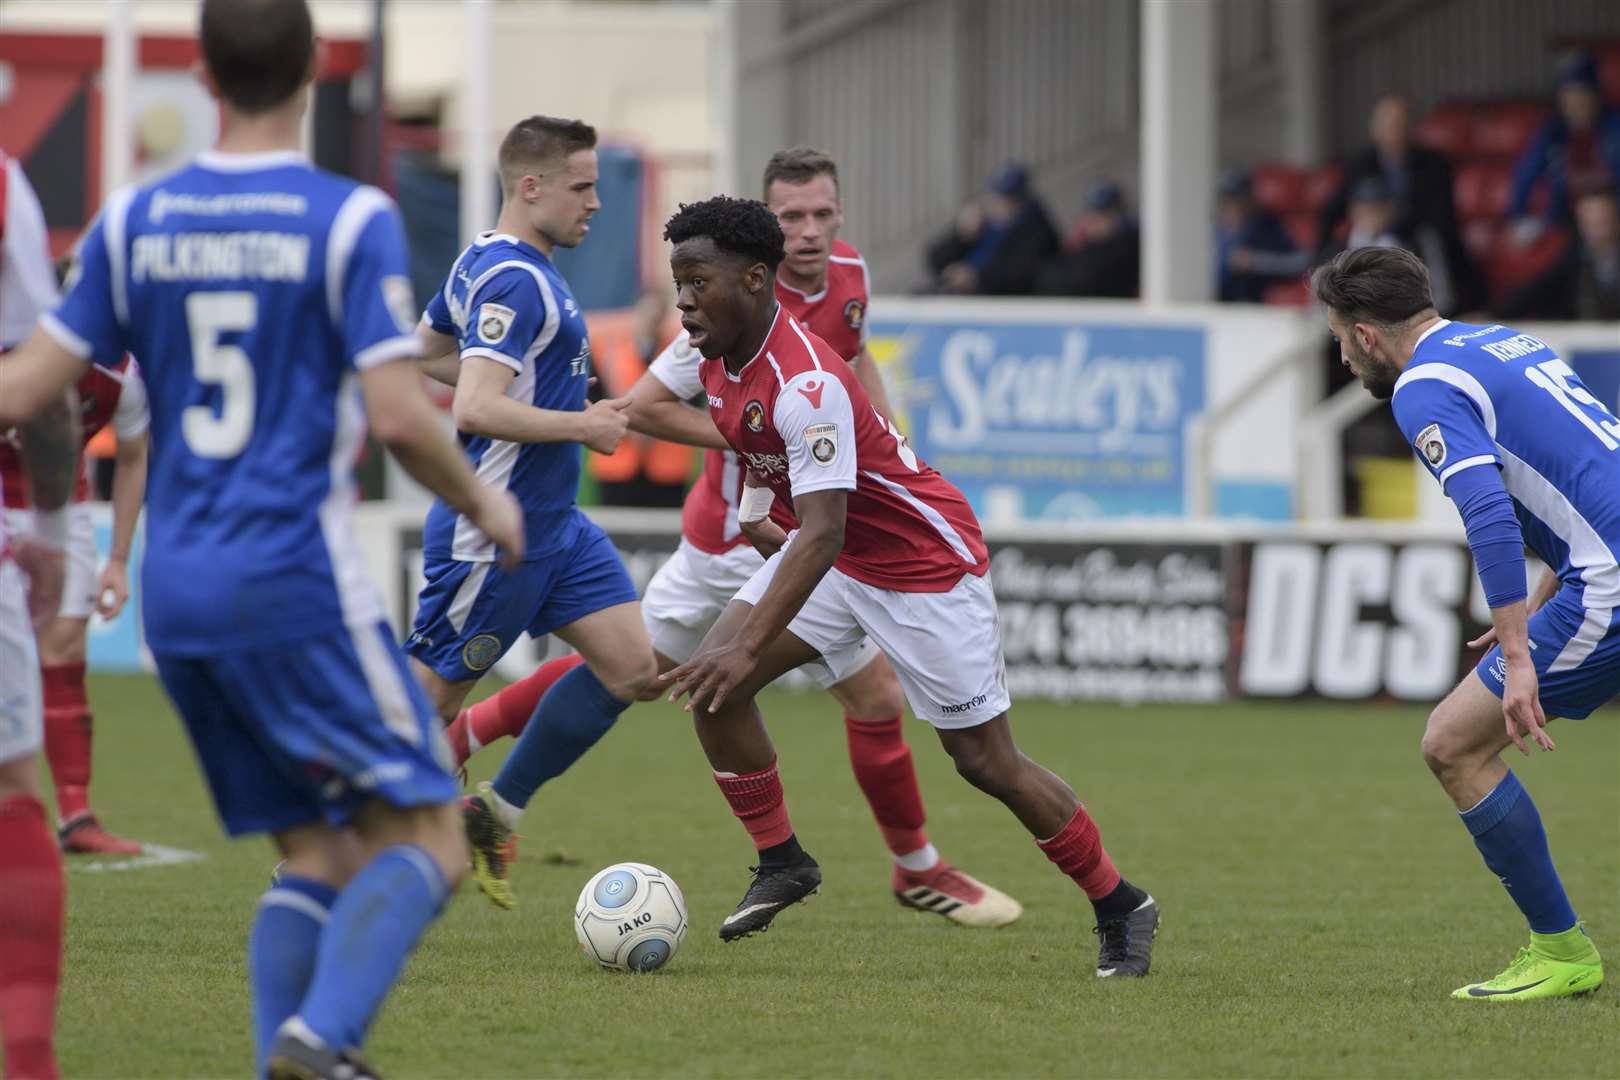 Norman Wabo looks to cause havoc in the Macclesfield defence Picture: Andy Payton